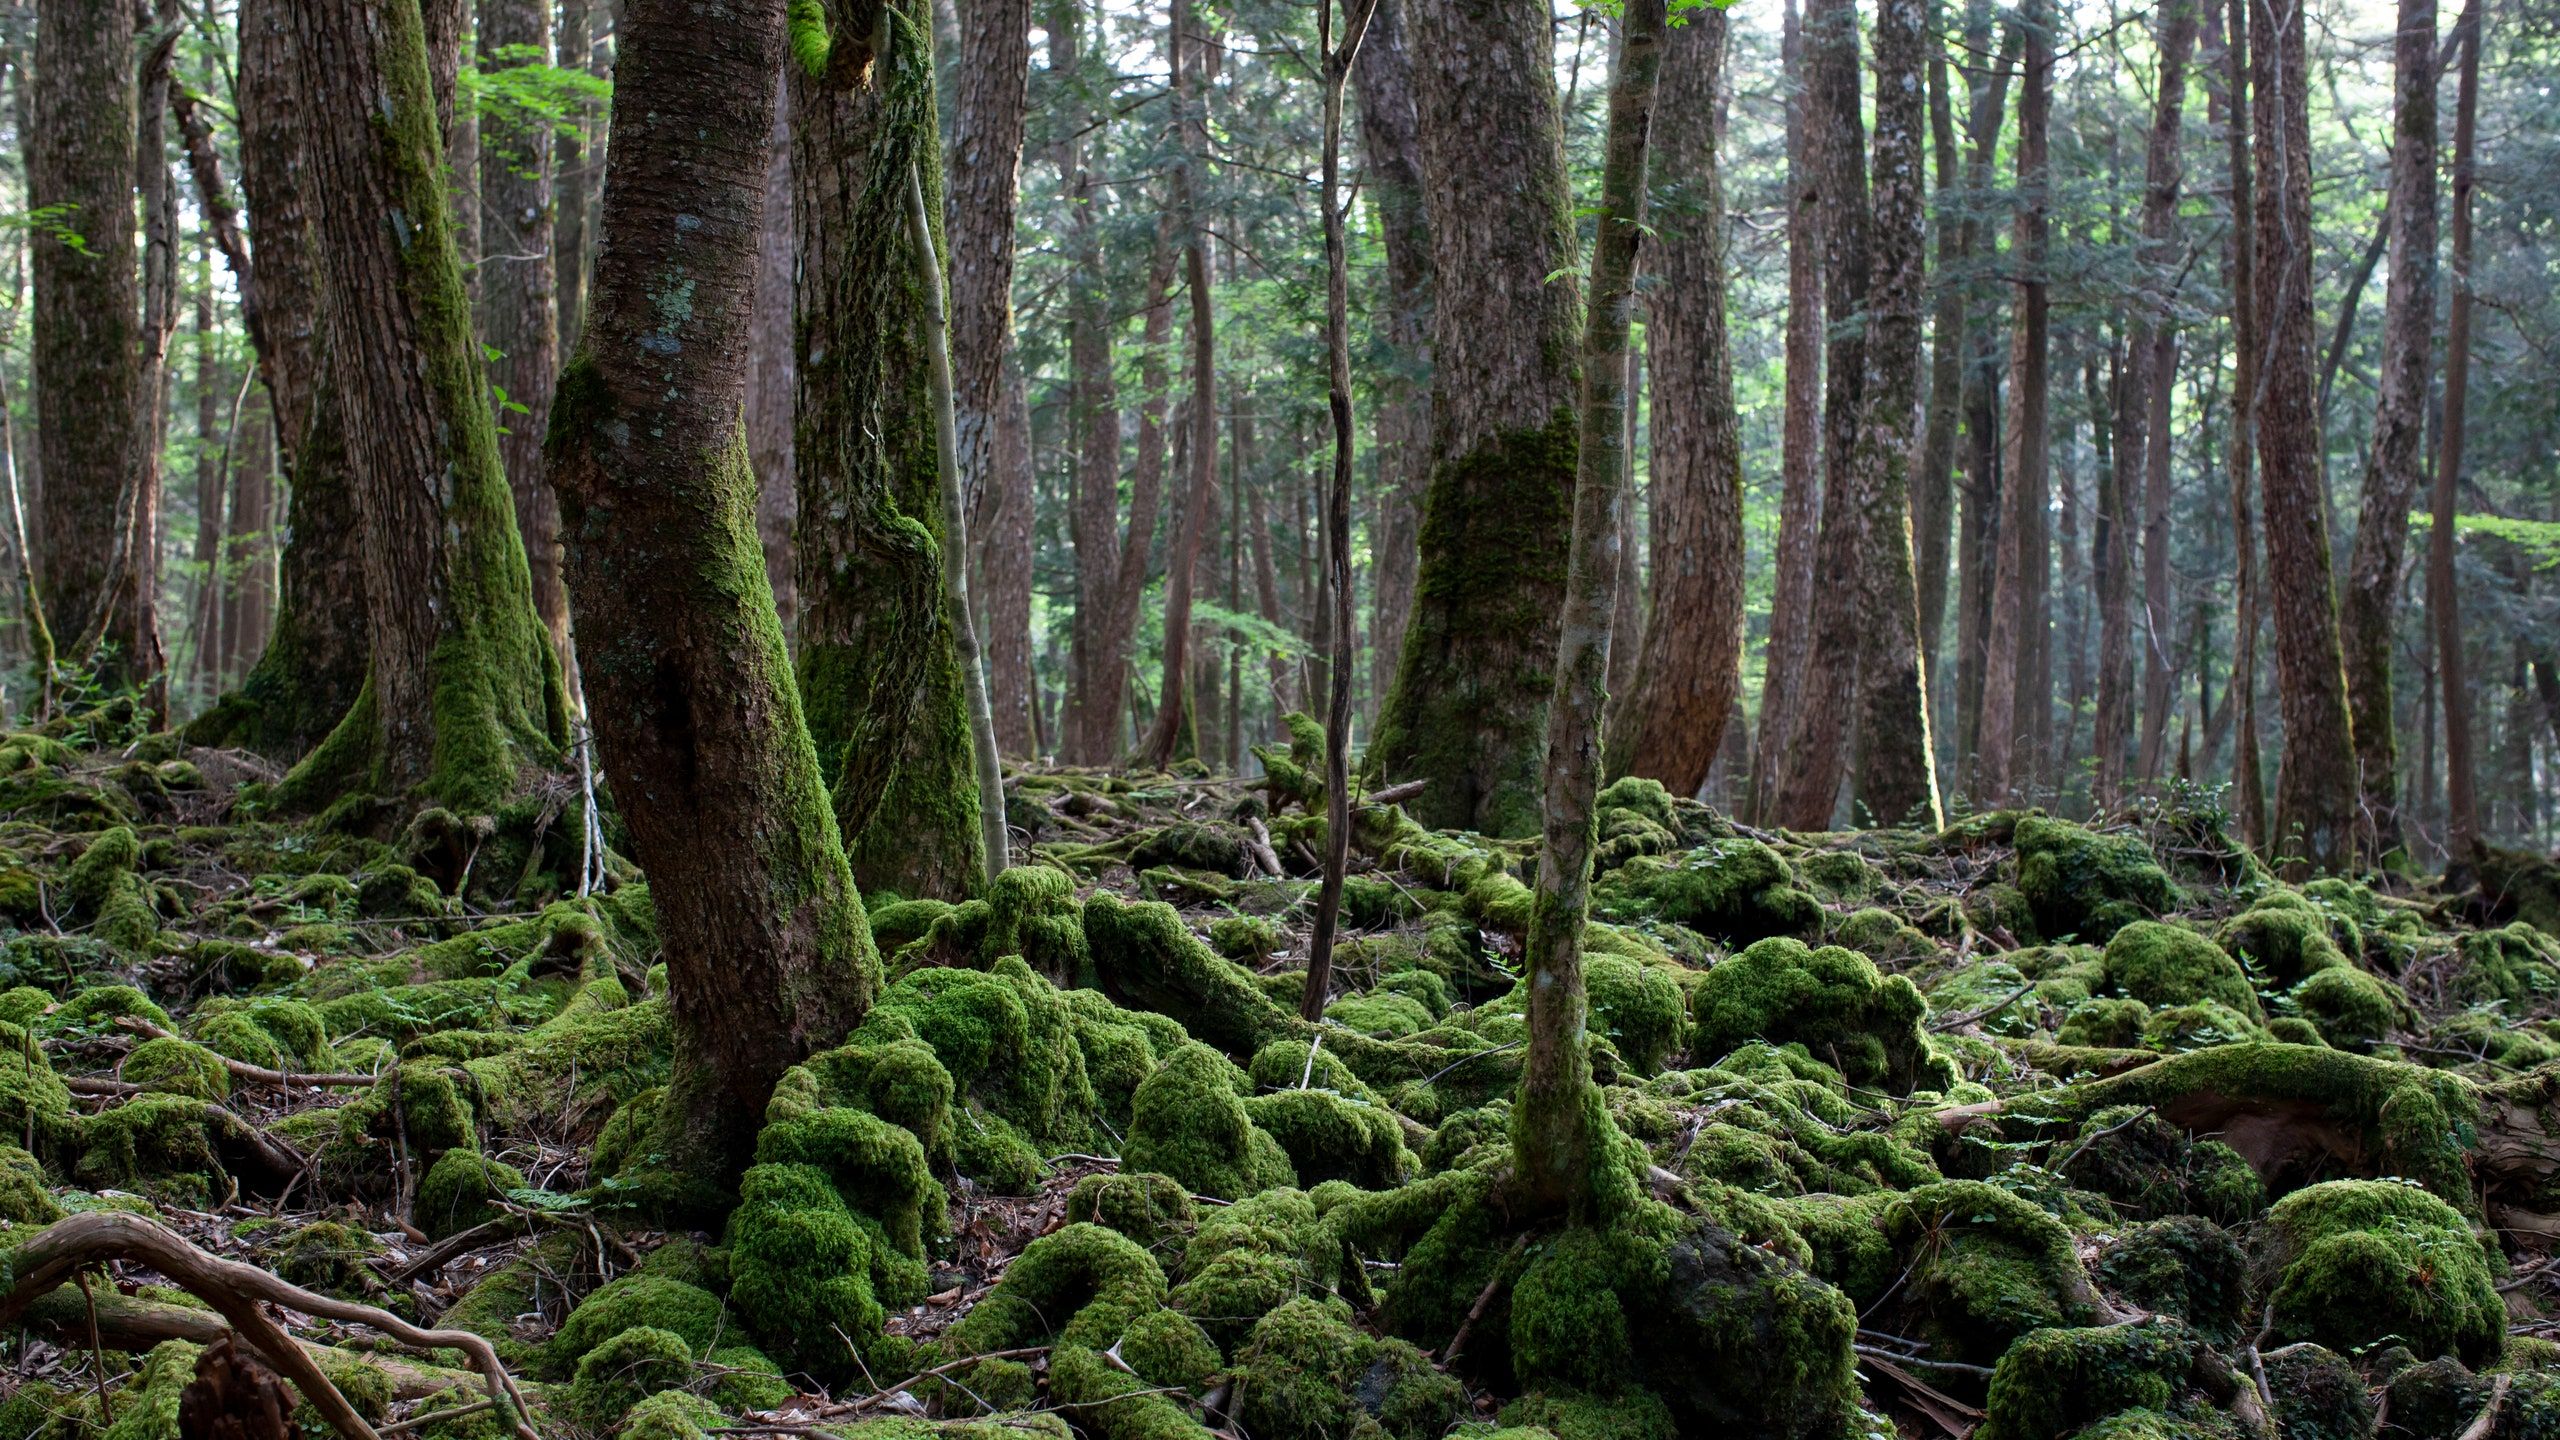 aokigahara forest, moss covering the roots of several treesand the ground around them. The trees are spindly and bend at different angles with fog settling around them.